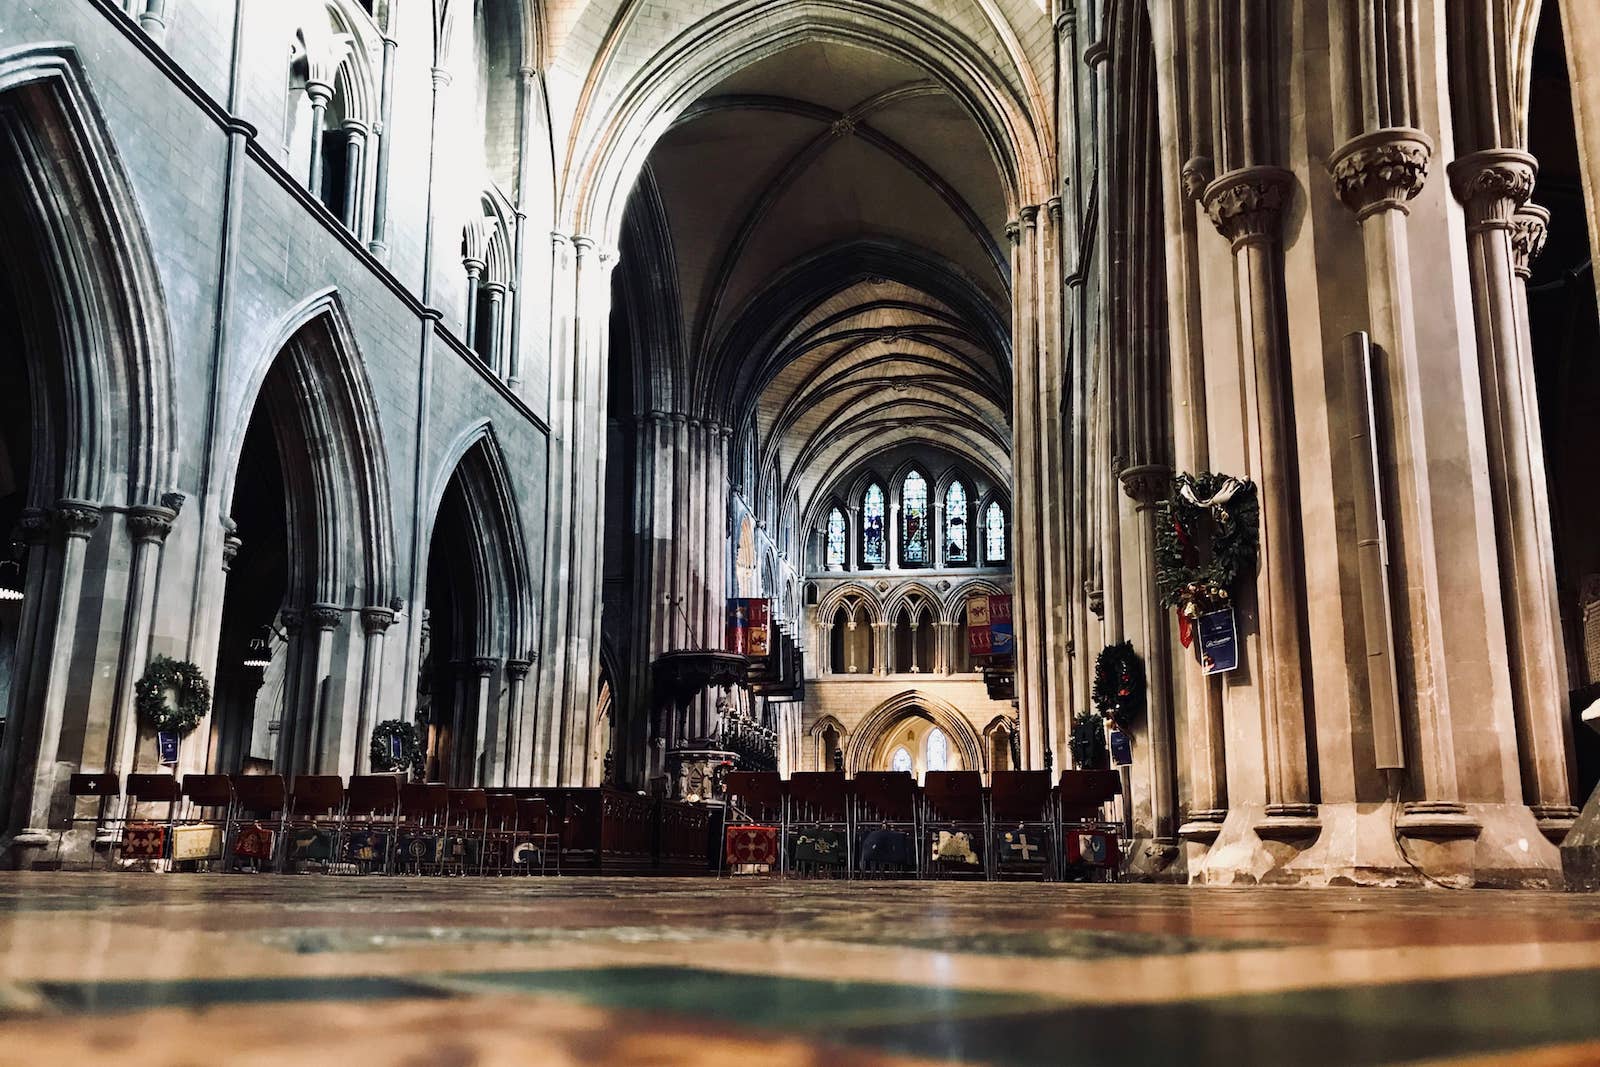 A view of the interior of St. Patrick's Cathedrial